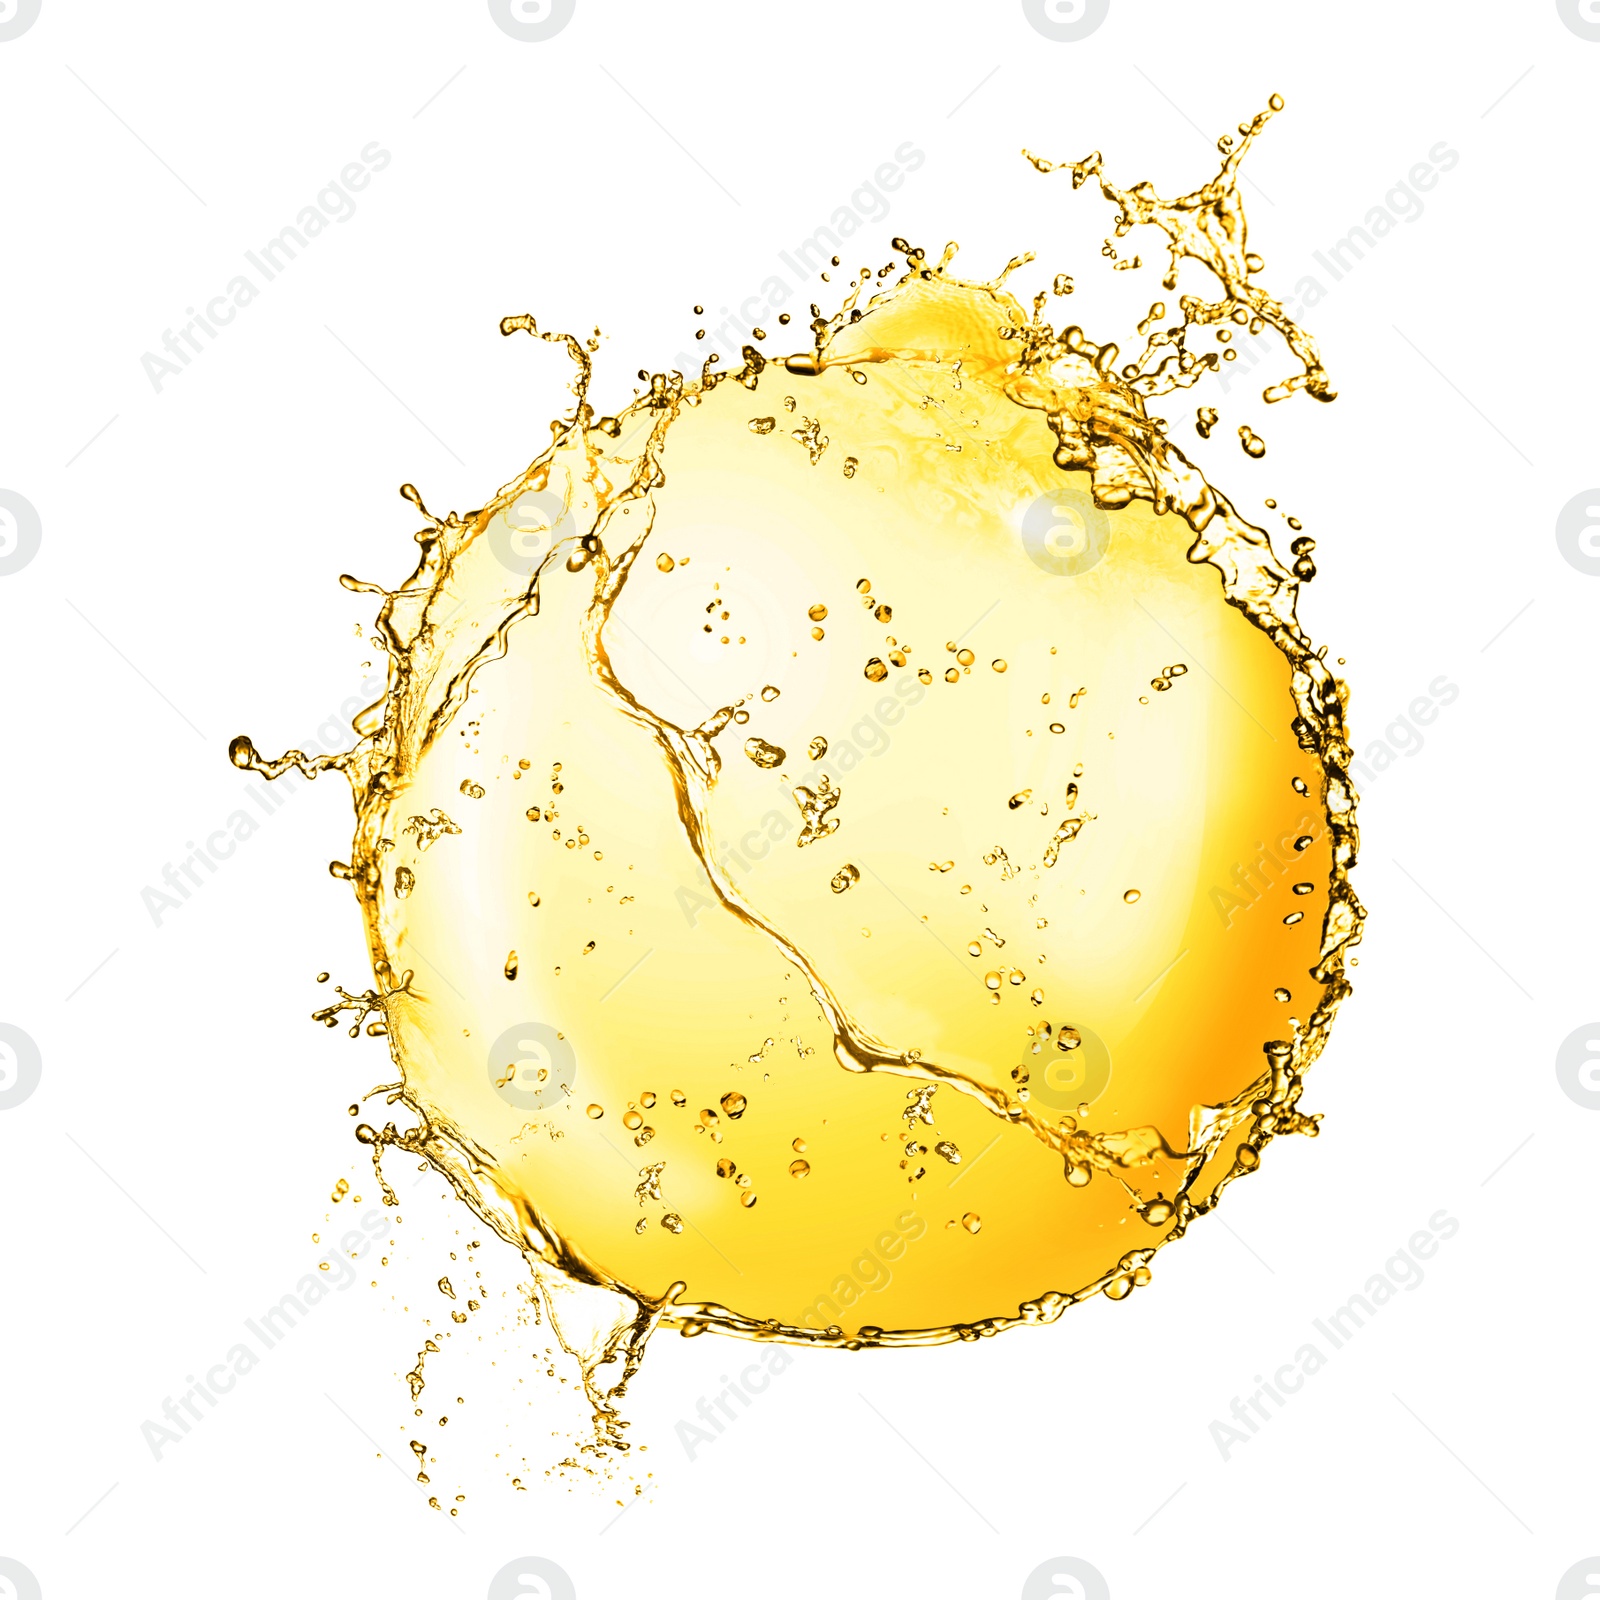 Image of Abstract splash of golden oily liquid on white background